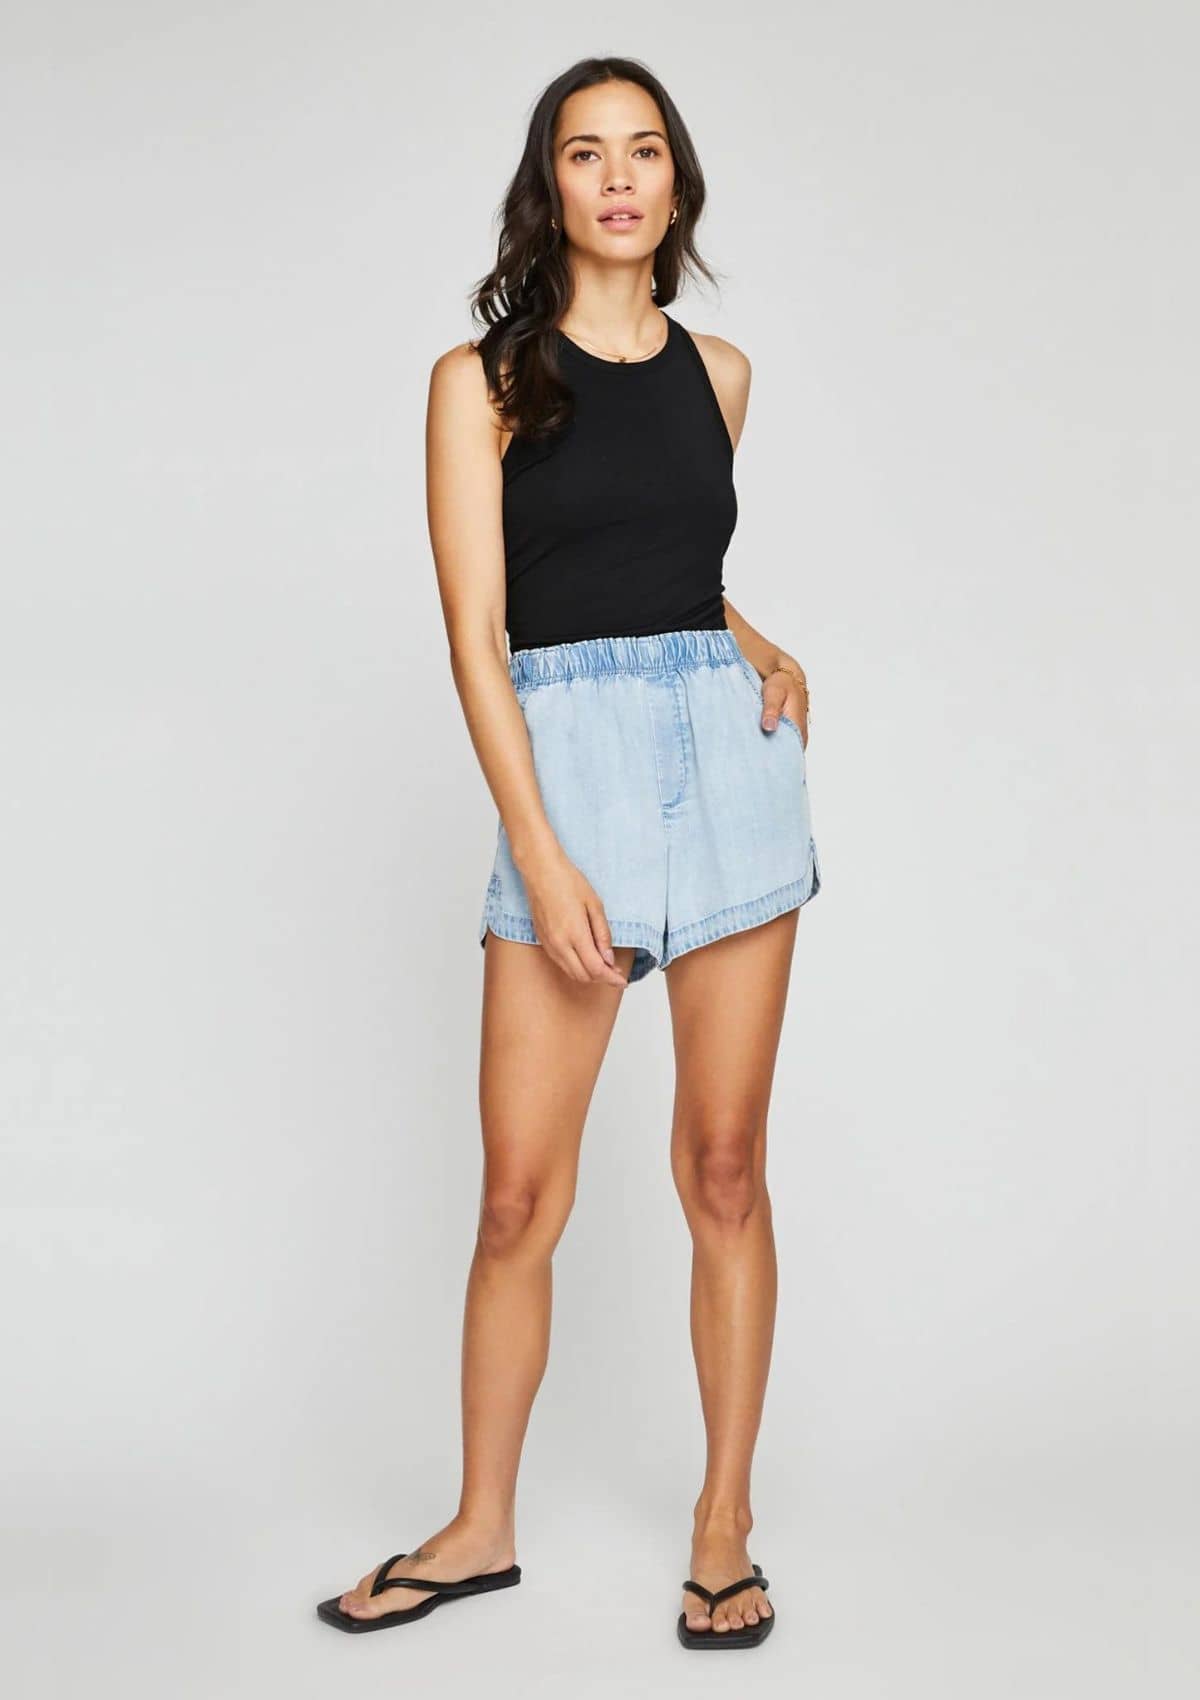 Tucked in high rise jean shorts.